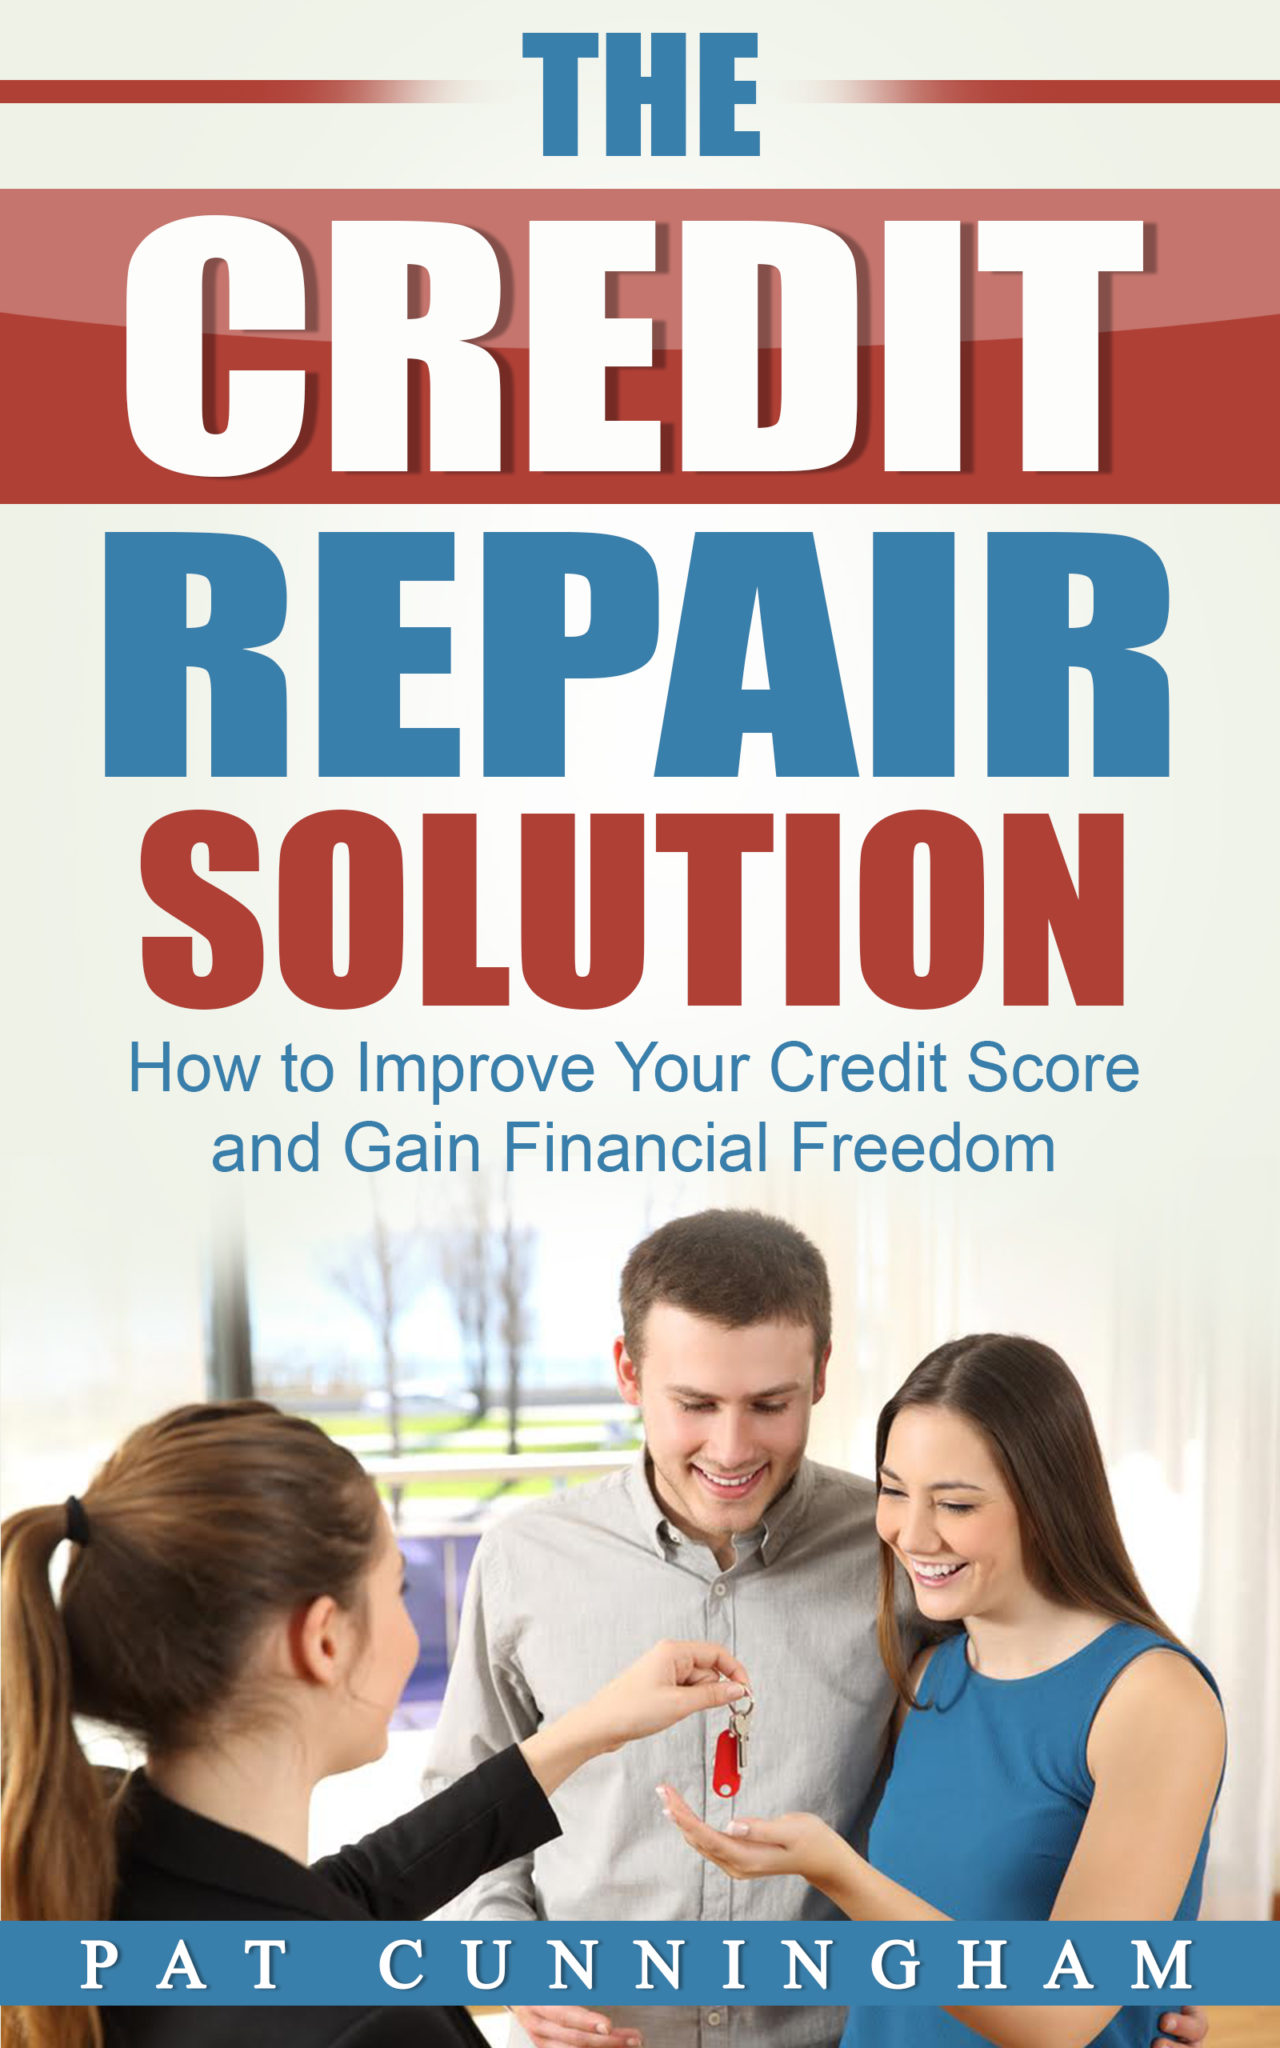 FREE: The Credit Repair Solution: How to Improve Your Credit Score and Gain Financial Freedom by Pat Cunningham